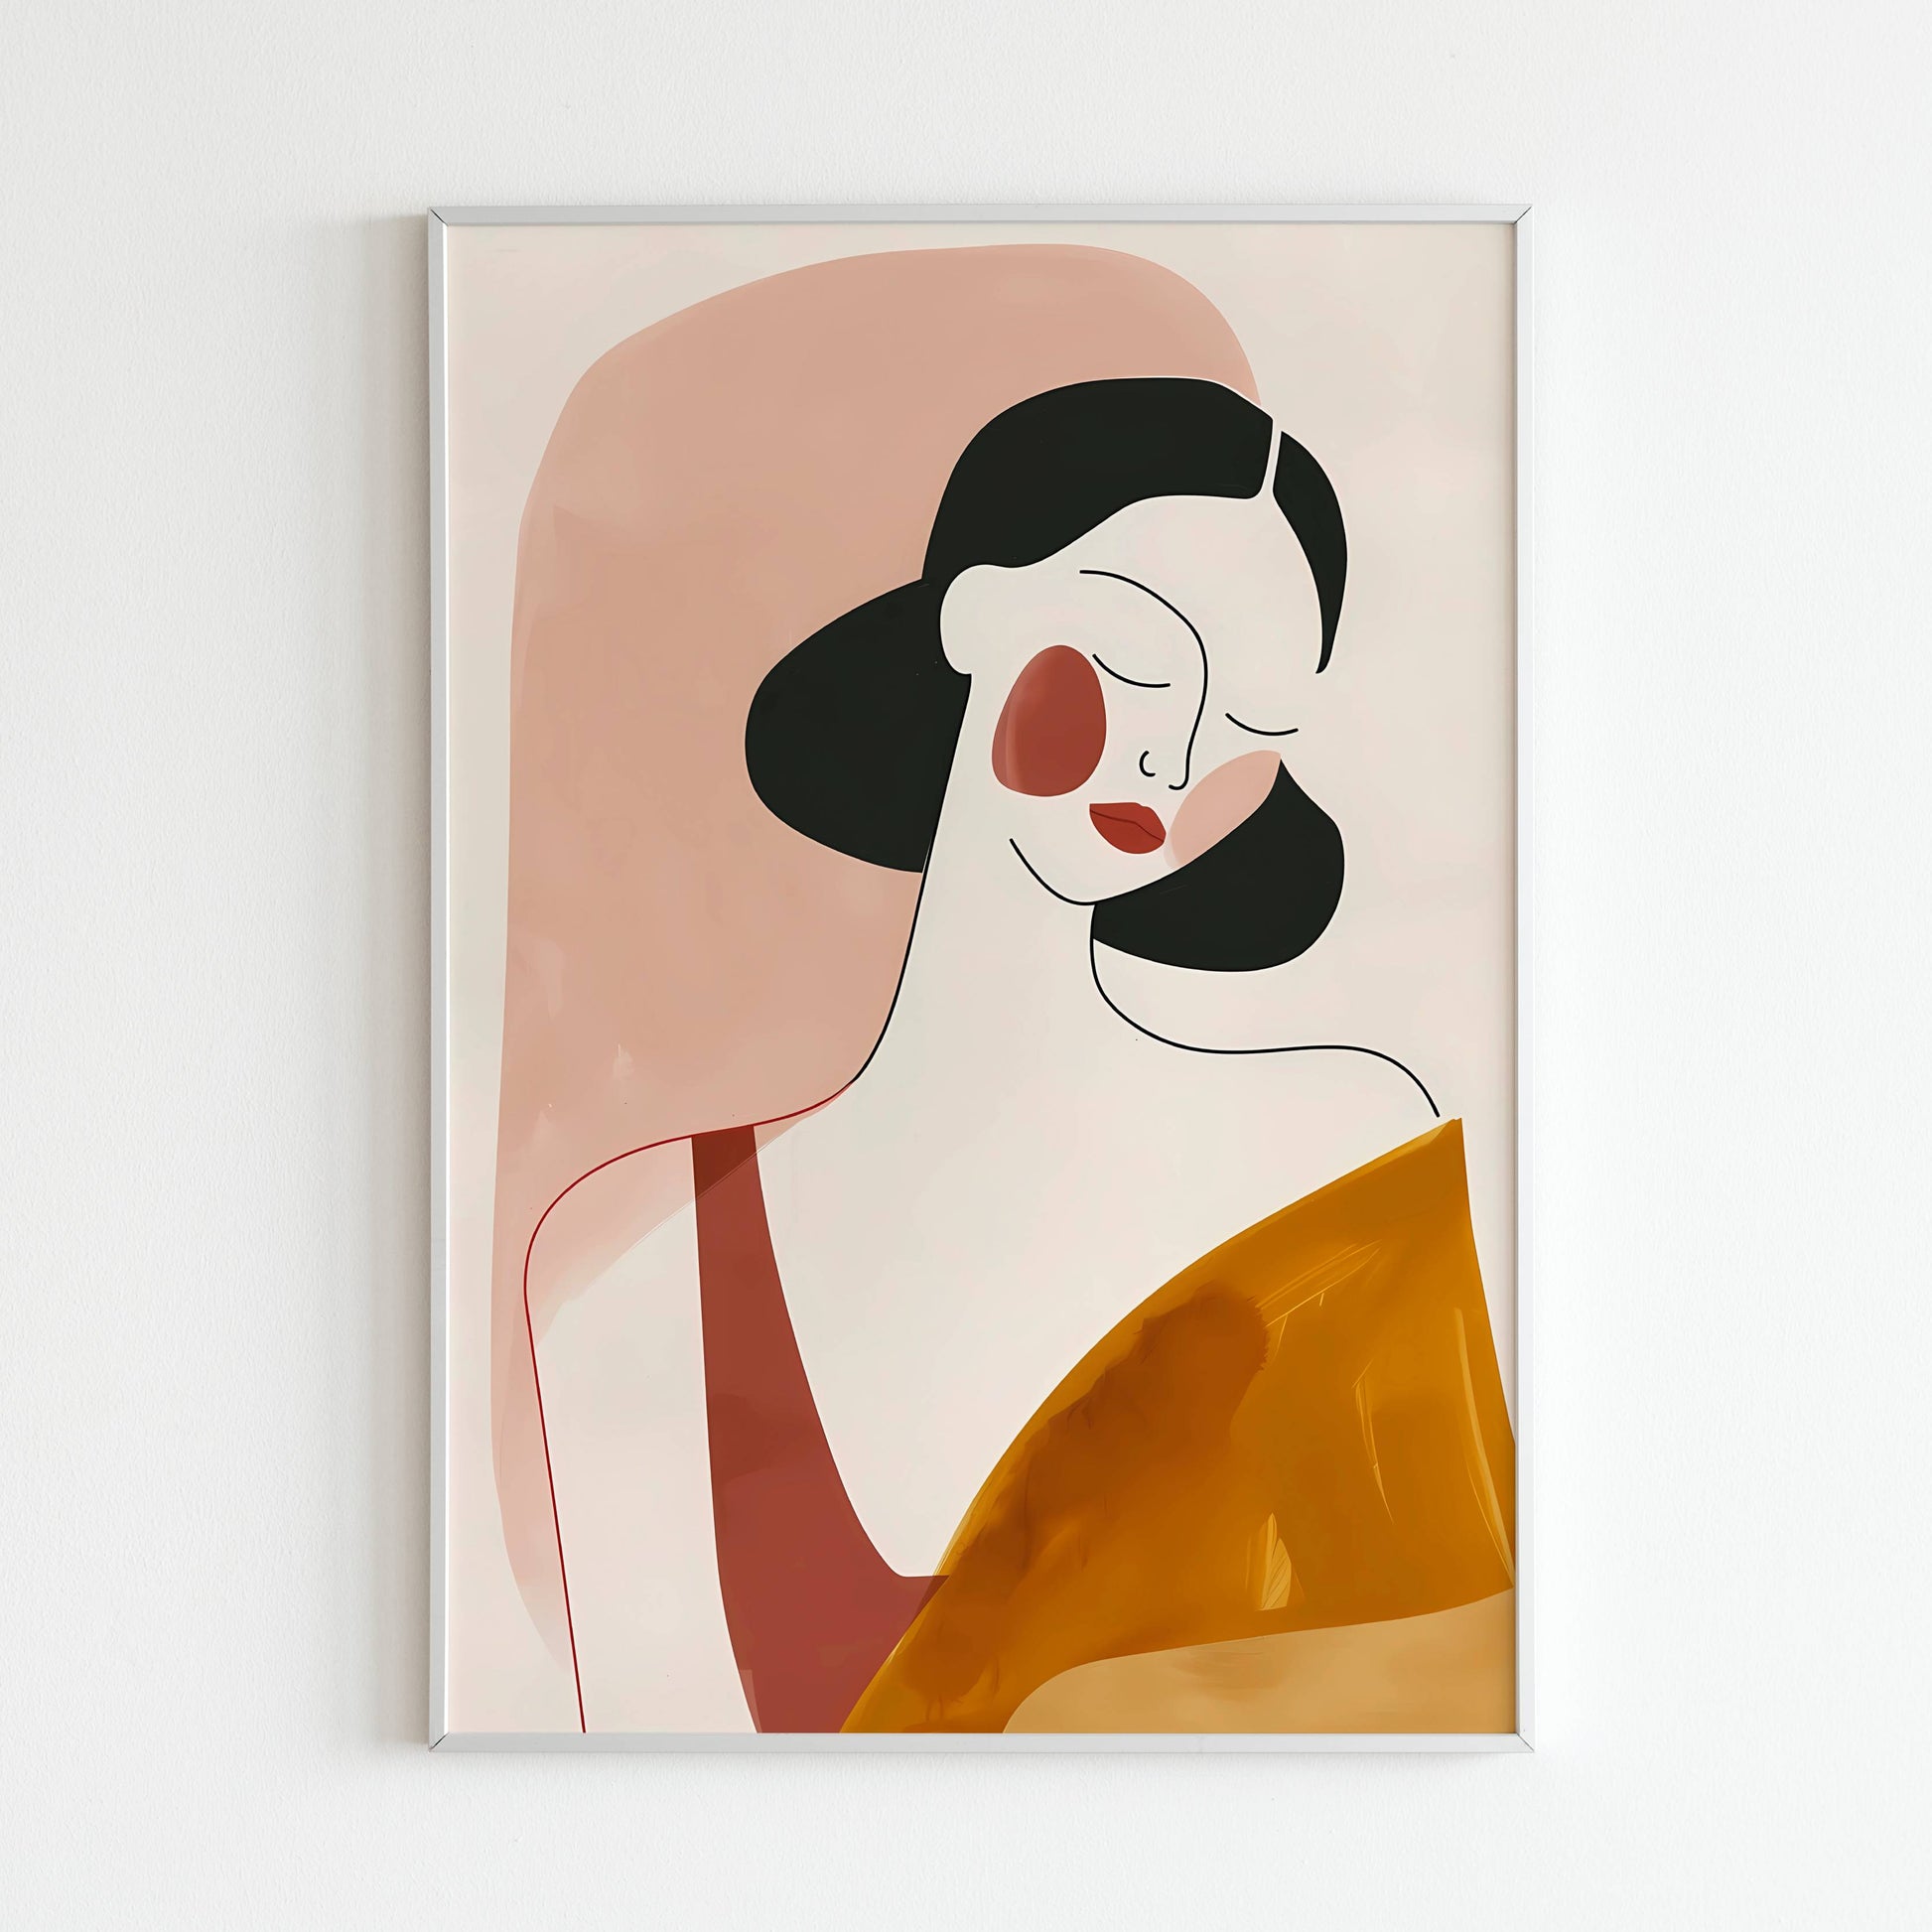 Minimalist Fashion Woman - Printed Wall Art / Poster. This beautiful minimalist poster showcases a woman in a simple yet elegant style. Arrives ready to hang.